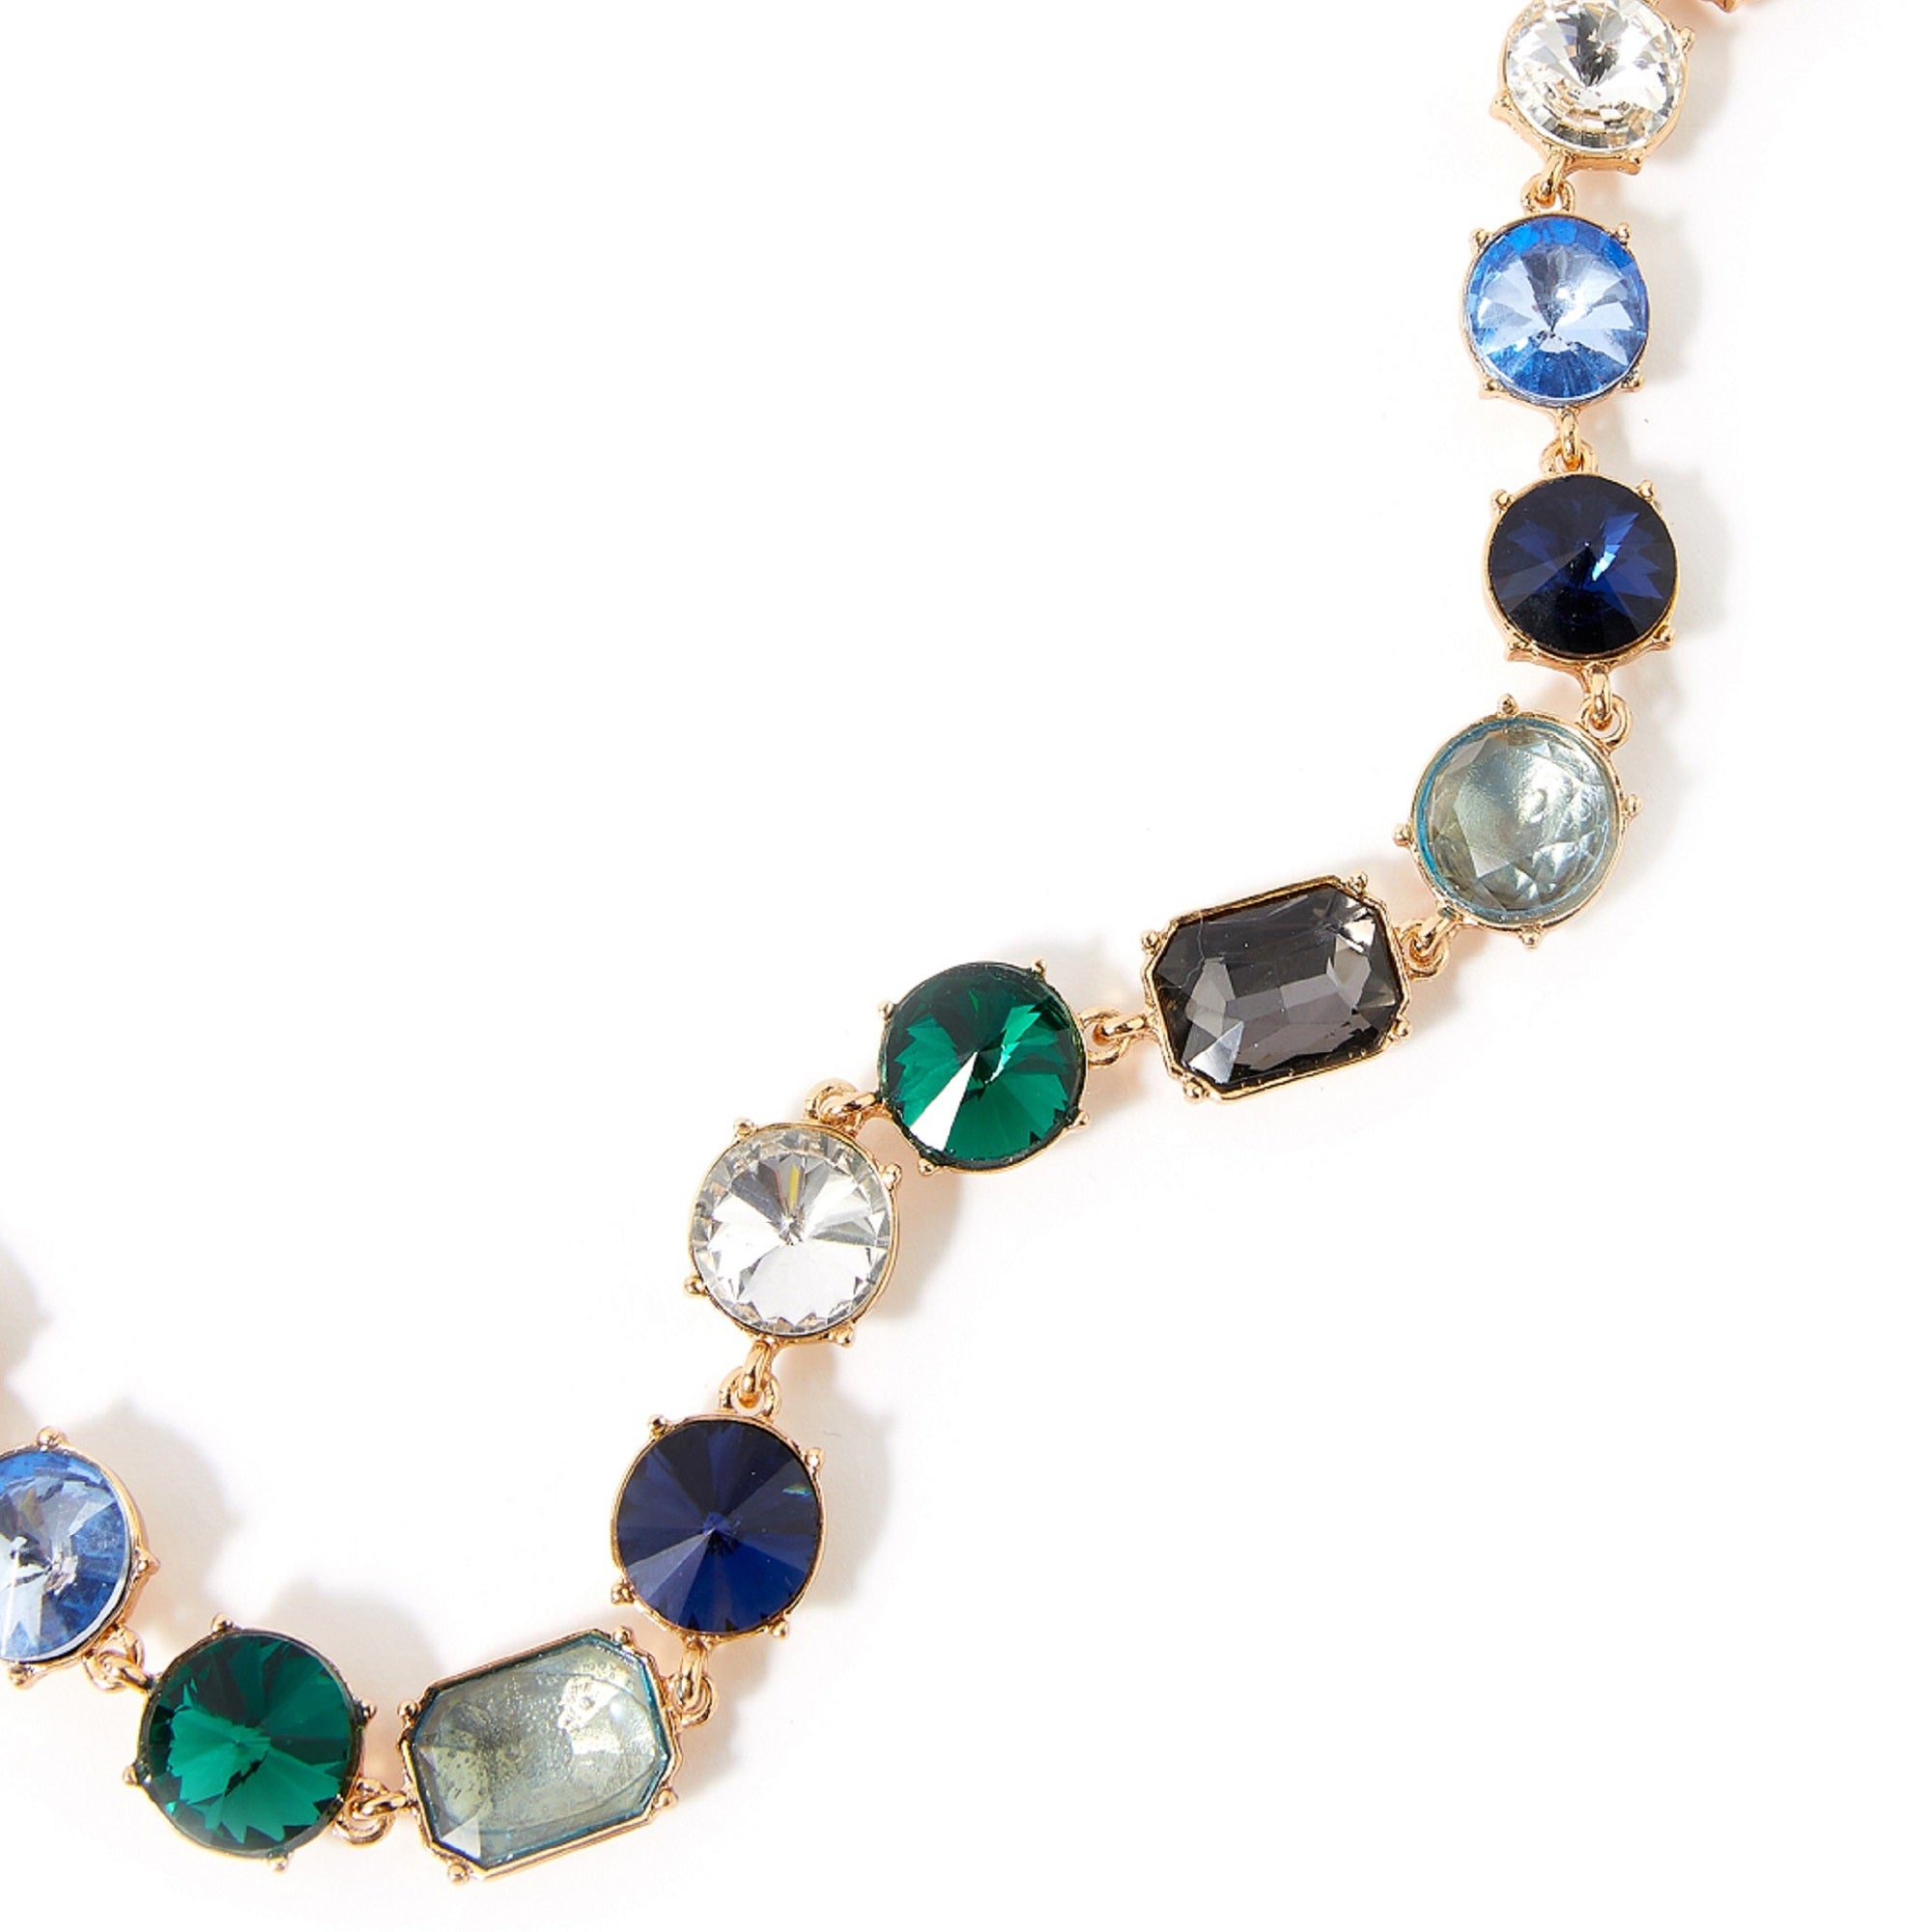 Accessorize London Women's Blue Harvest Mixed Shapes Crystal Collar Necklace